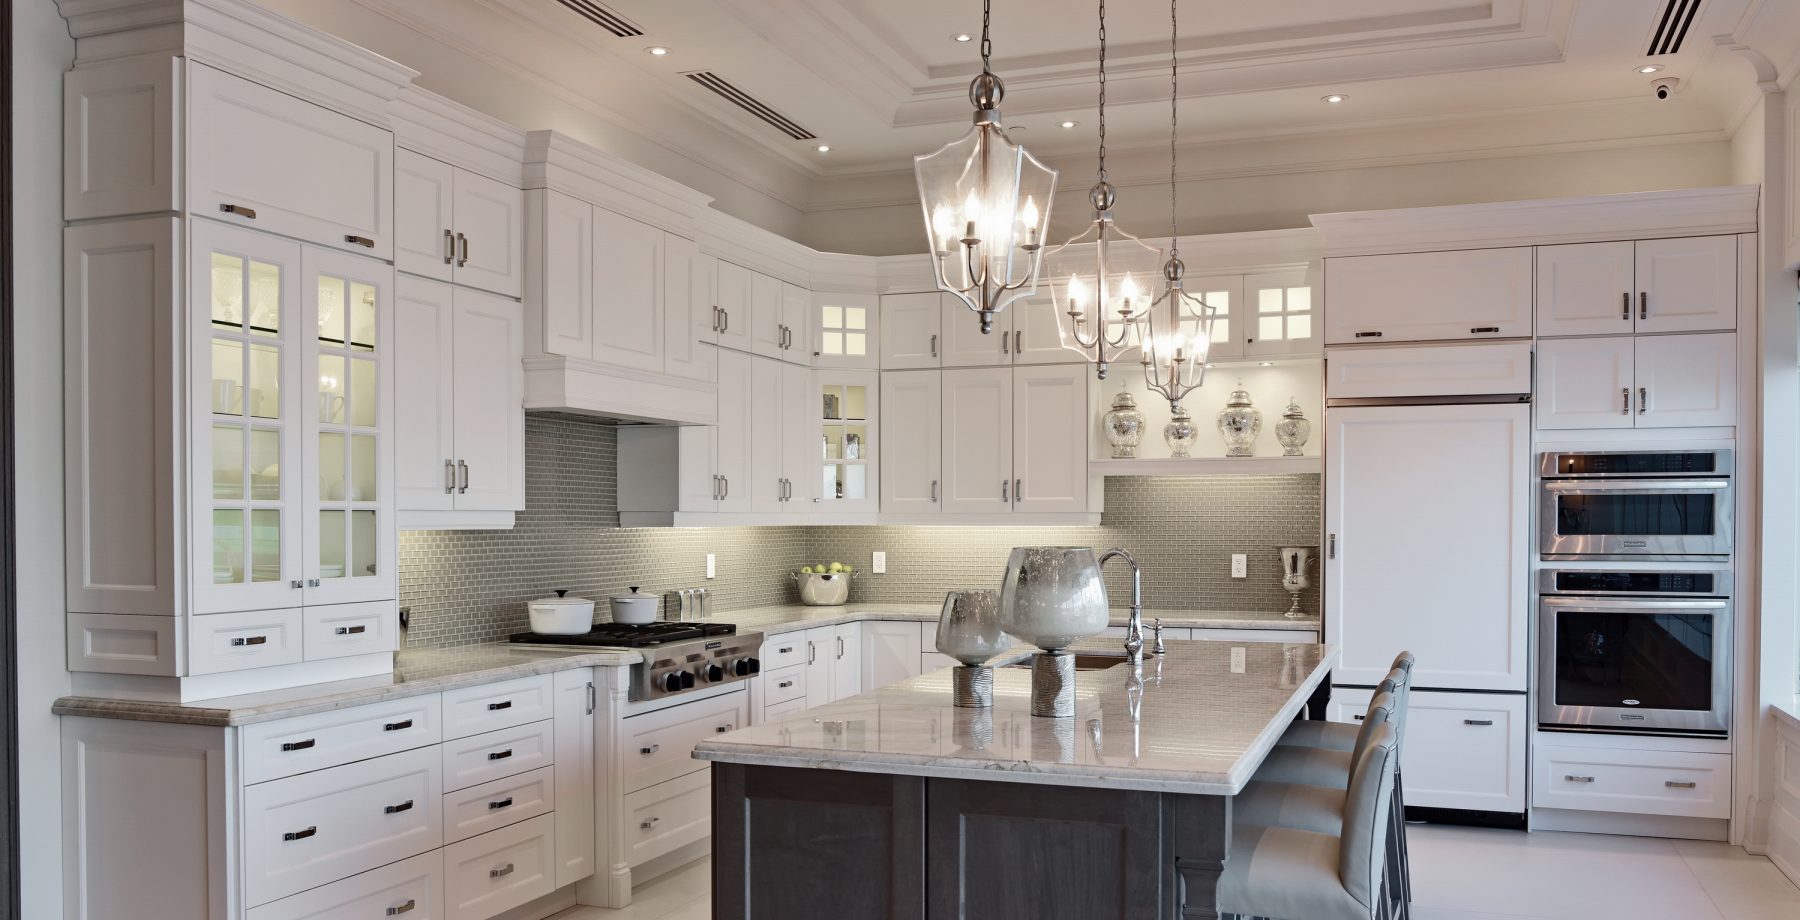 Home | Selba Kitchens & Baths is a Canadian based company ...